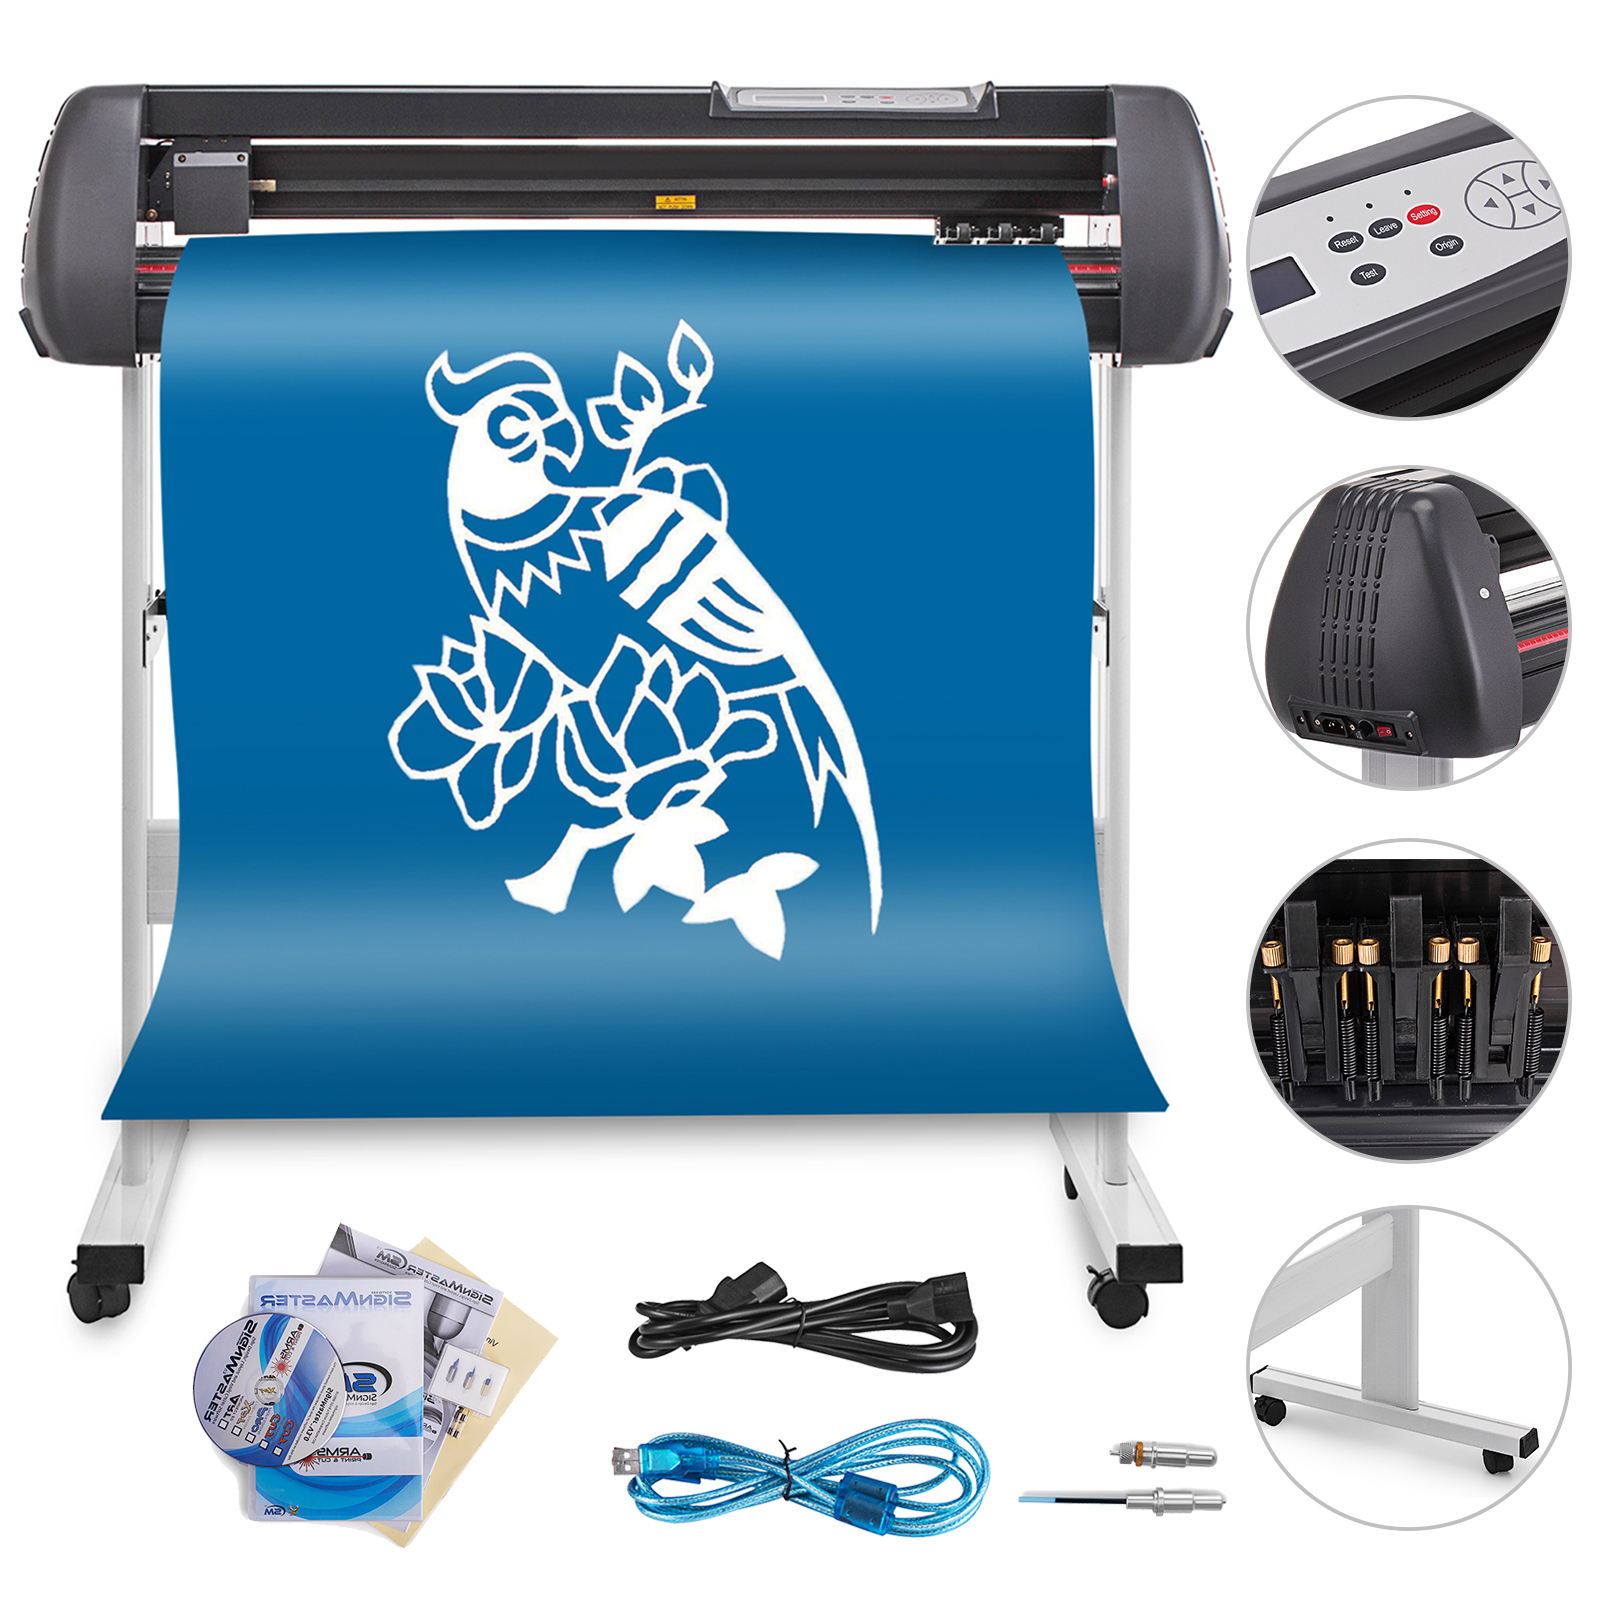 cutting plotter 361 software free download